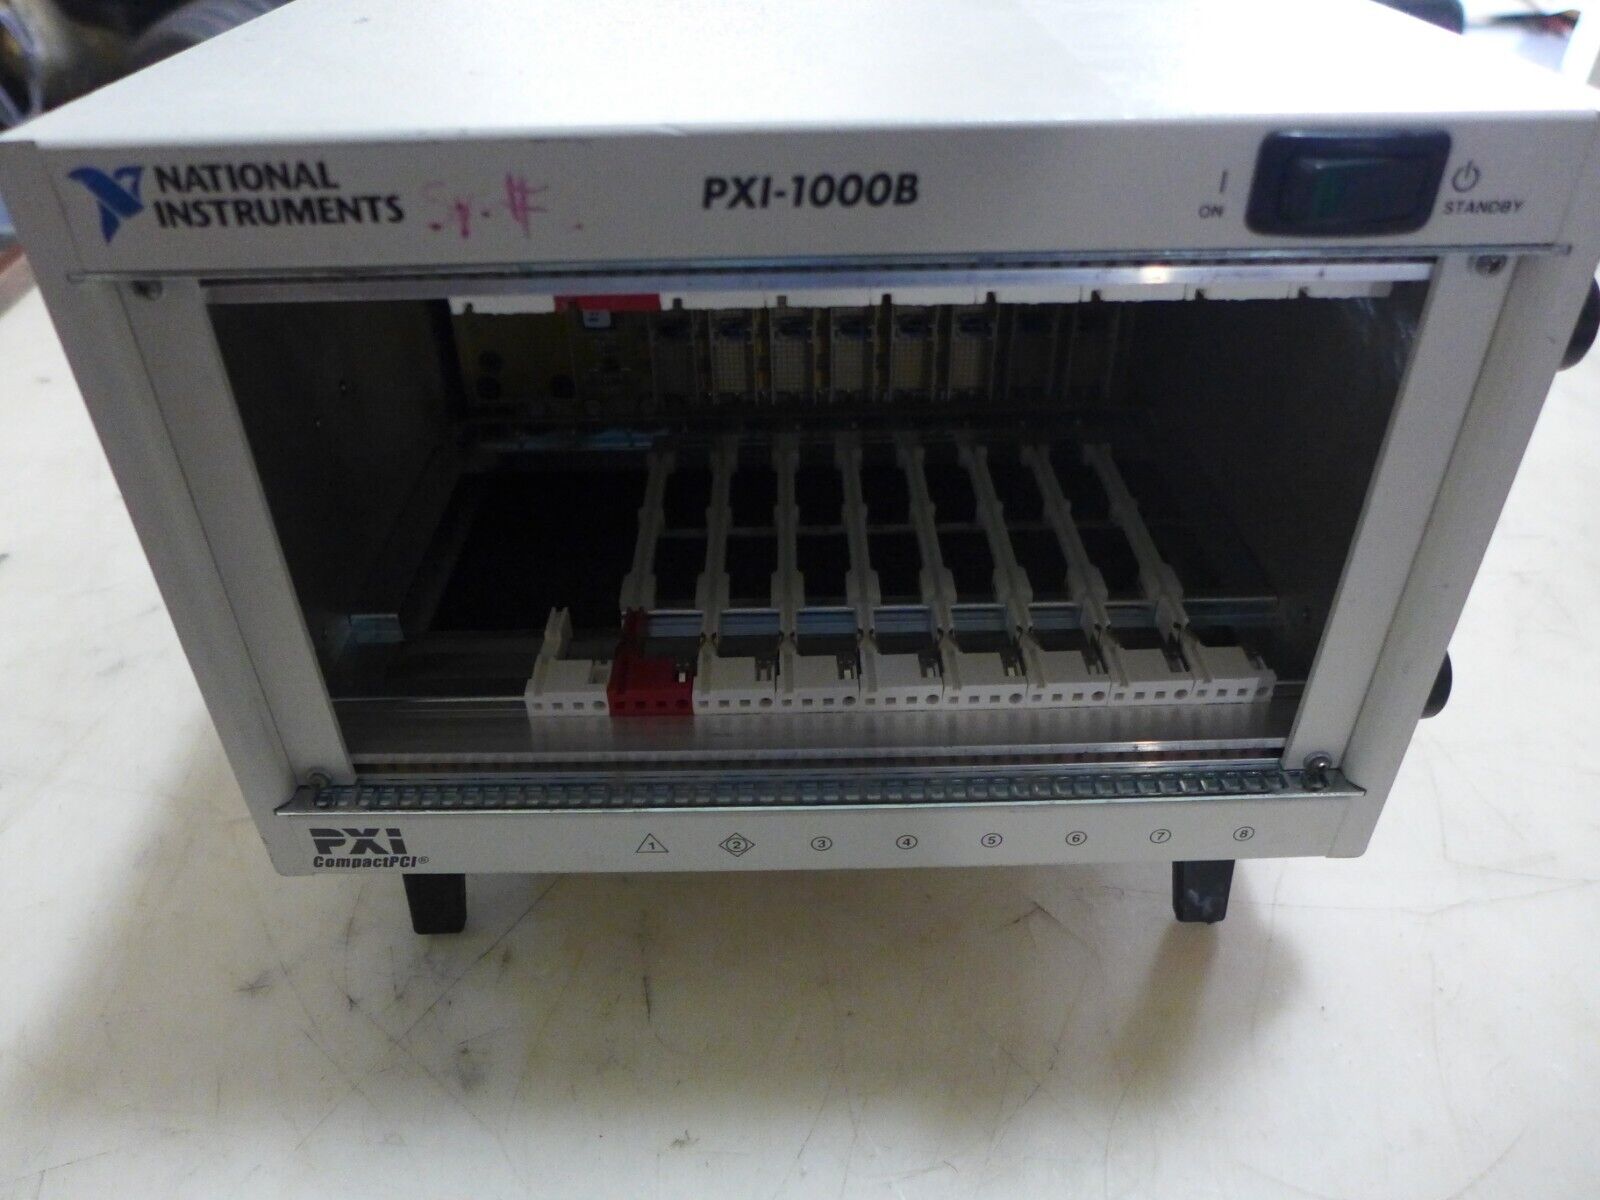 NATIONAL INSTRUMENTS PXI-1000B 8 SLOT CHASSIS PXI MAINFRAME  V198